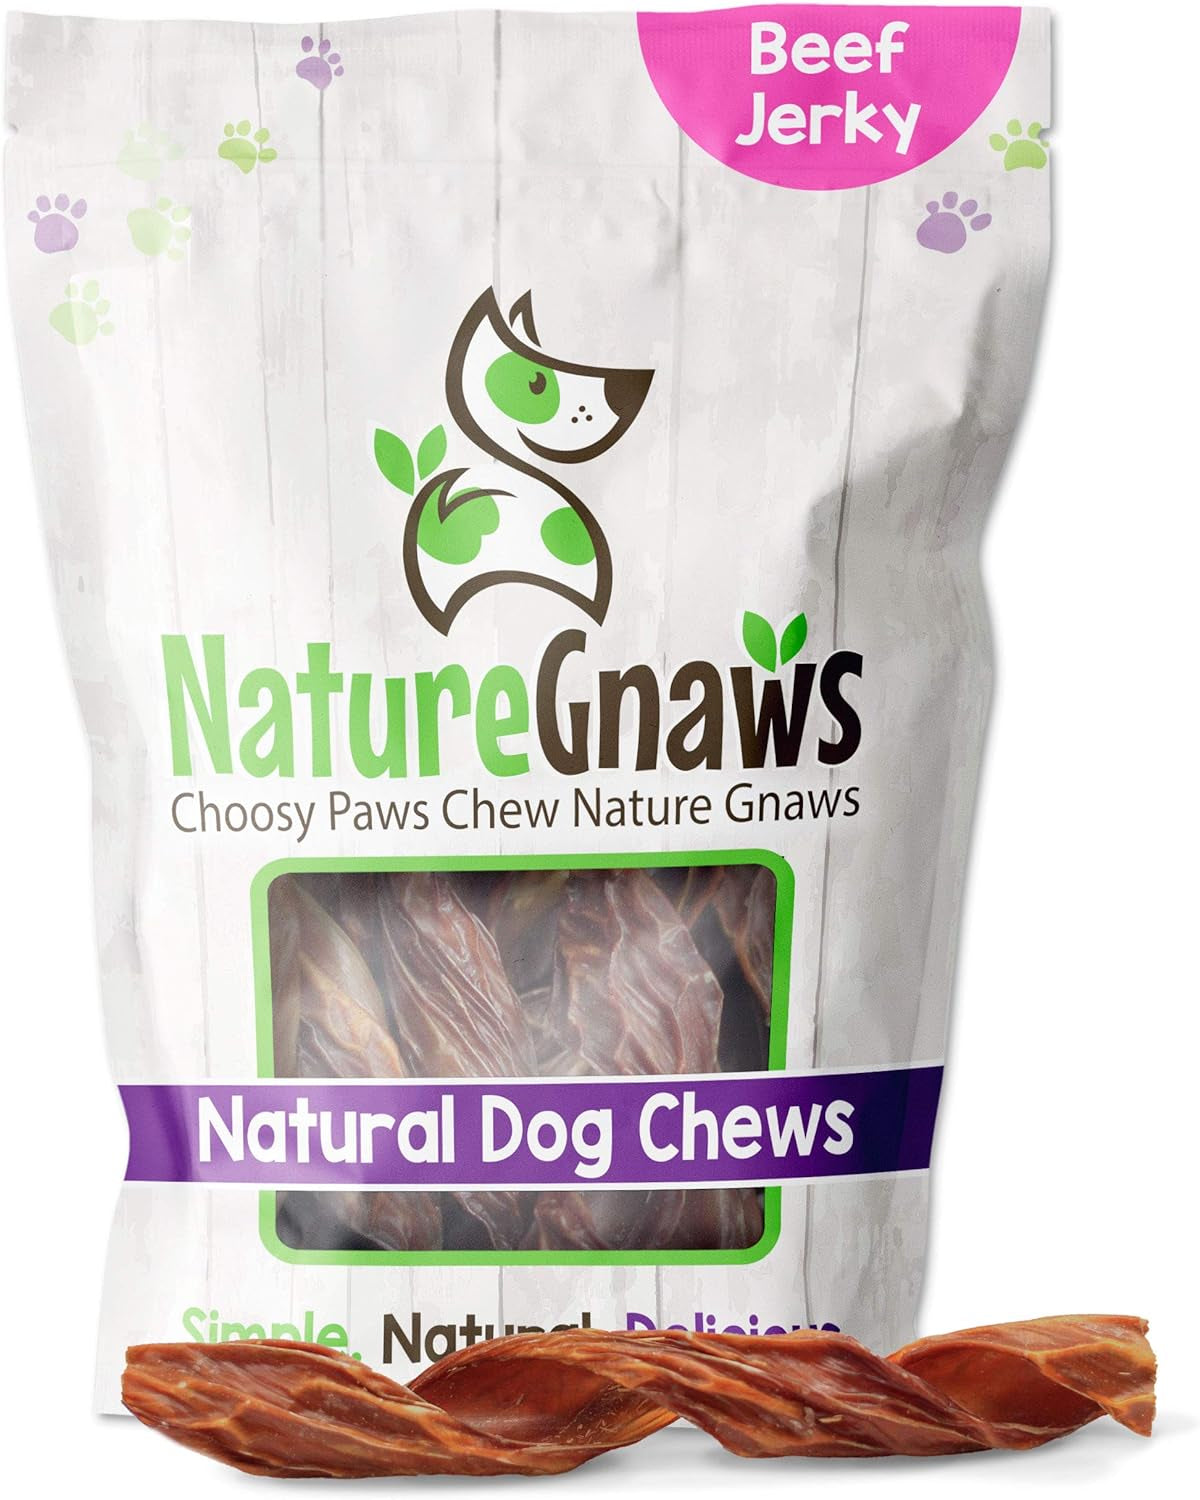 - Beef Jerky Springs for Dogs - Premium Natural Beef Gullet Sticks - Simple Single Ingredient Tasty Dog Chew Treats - Rawhide Free 7-8 Inch